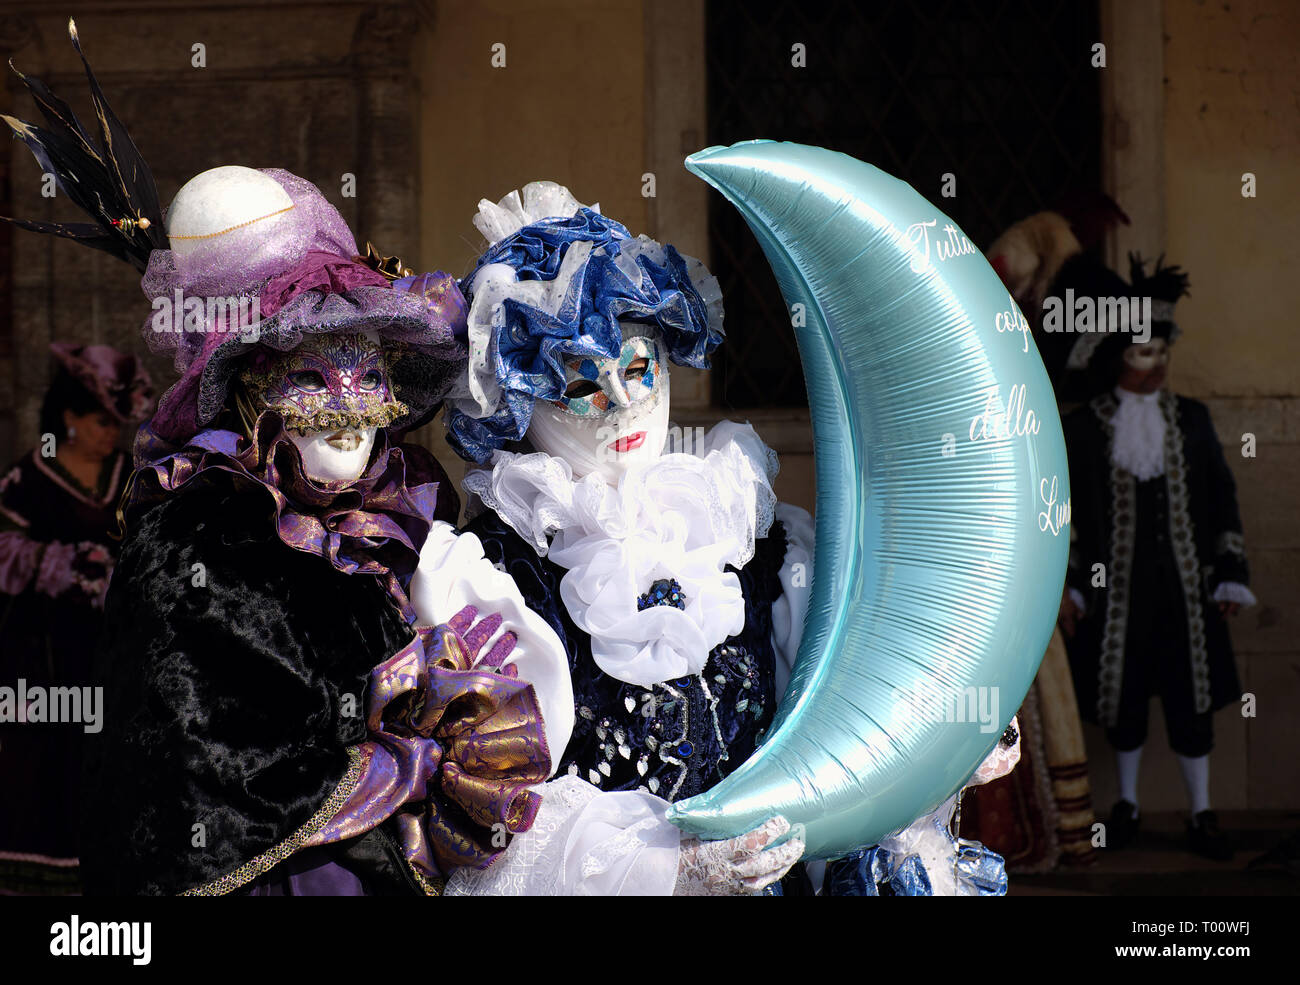 Woman dressed in traditional costume for Venice Carnival holding moon balloon standing at Doge’s Palace, Piazza San Marco, Venice, Veneto, Italy Stock Photo